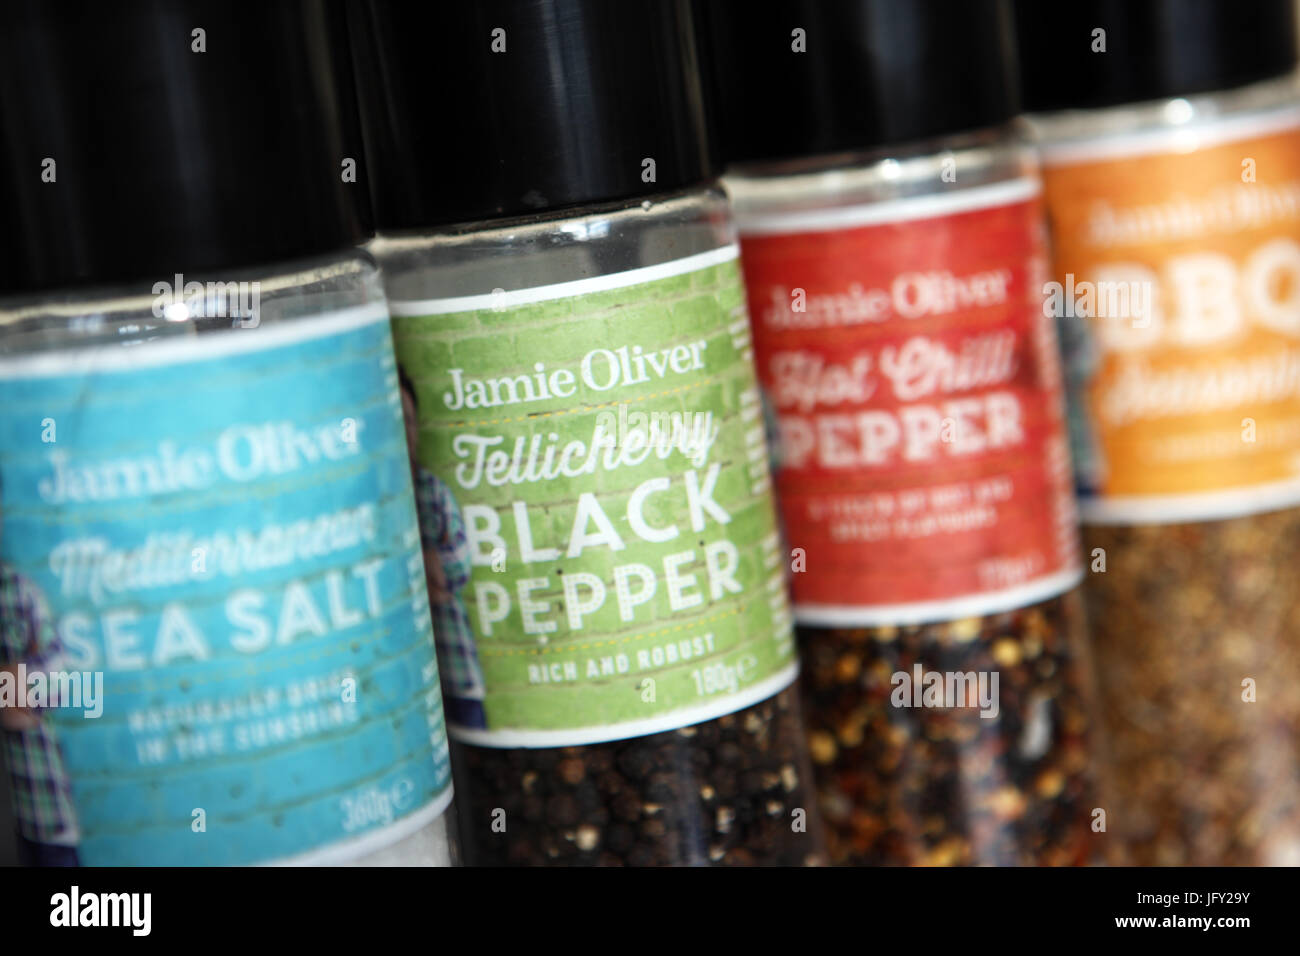 Jamie Oliver branded condiment products Stock Photo